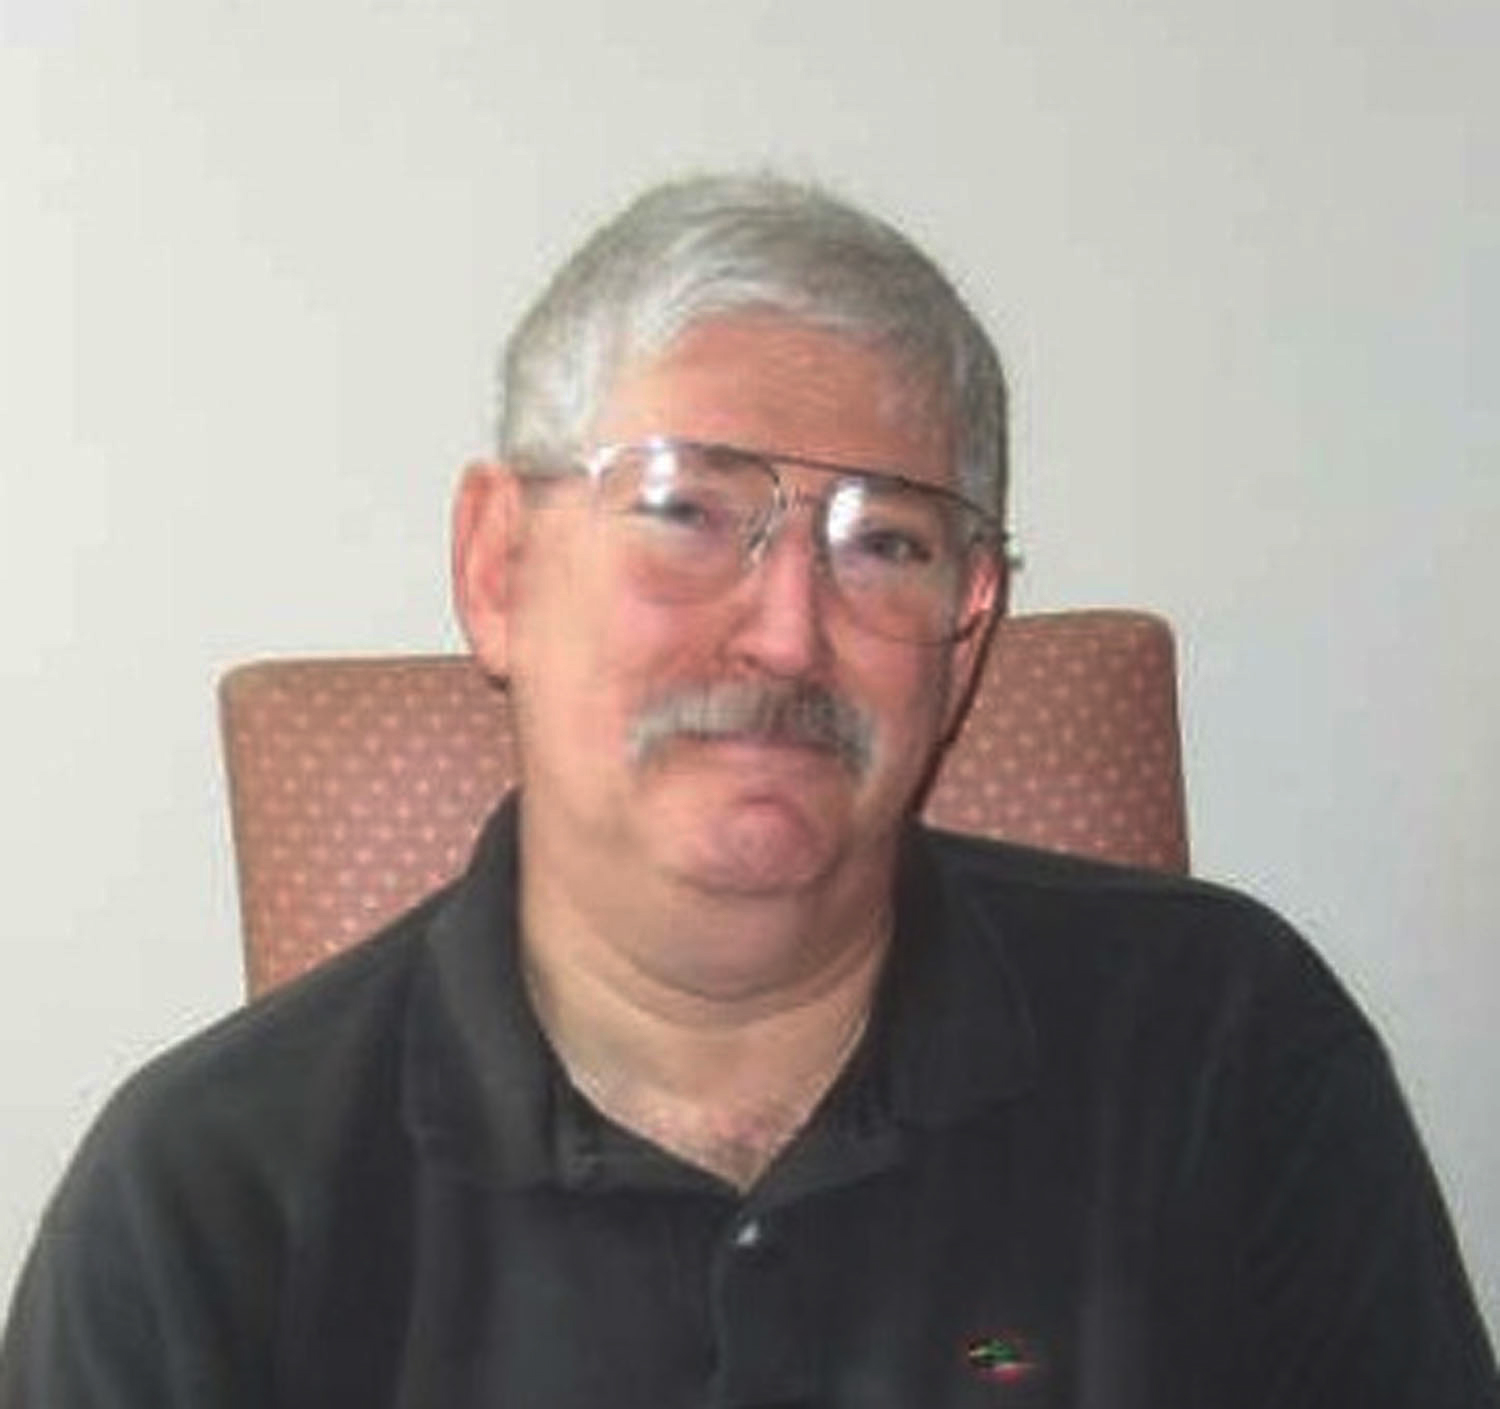 PHOTO: Former FBI Agent Bob Levinson is pictured in a 2007 image courtesy of the Levinson family at www.helpboblevinson.com.